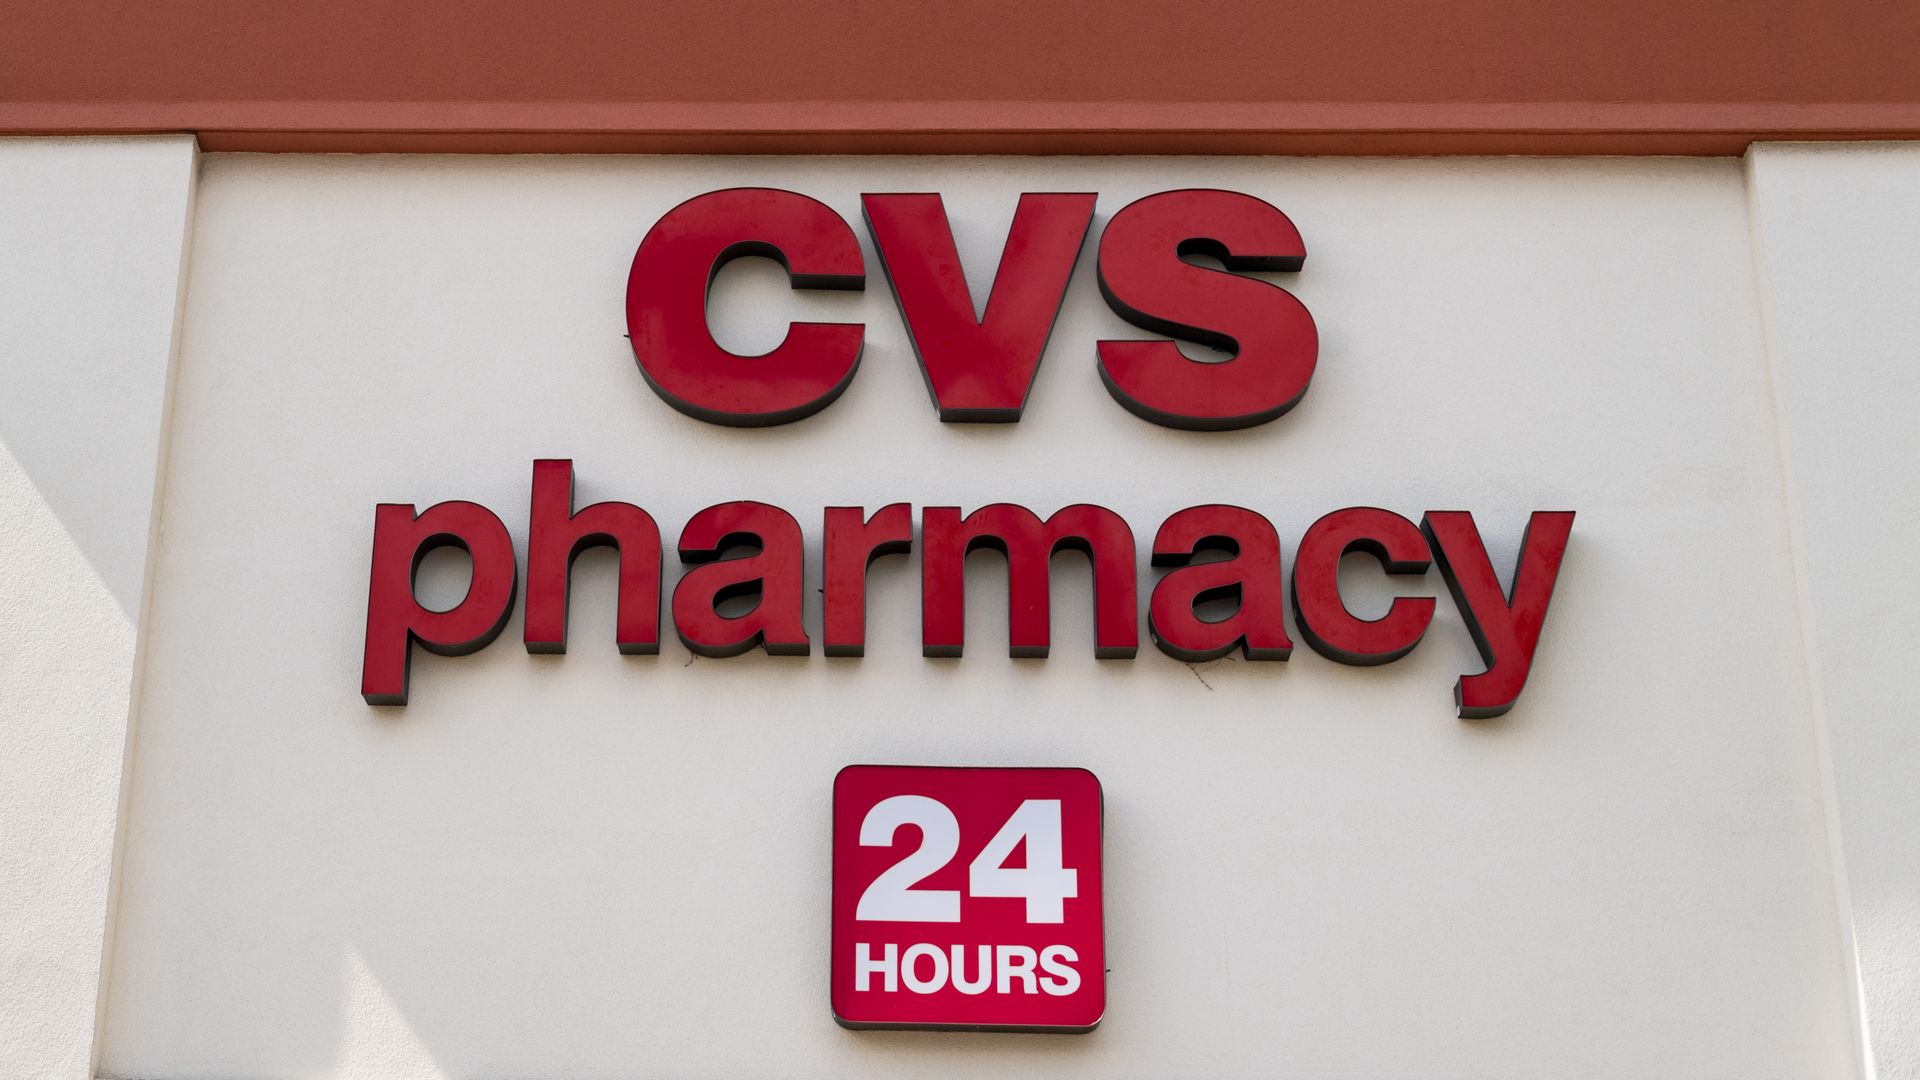 This image shows a CVS pharmacy sign that also says "24 hours"